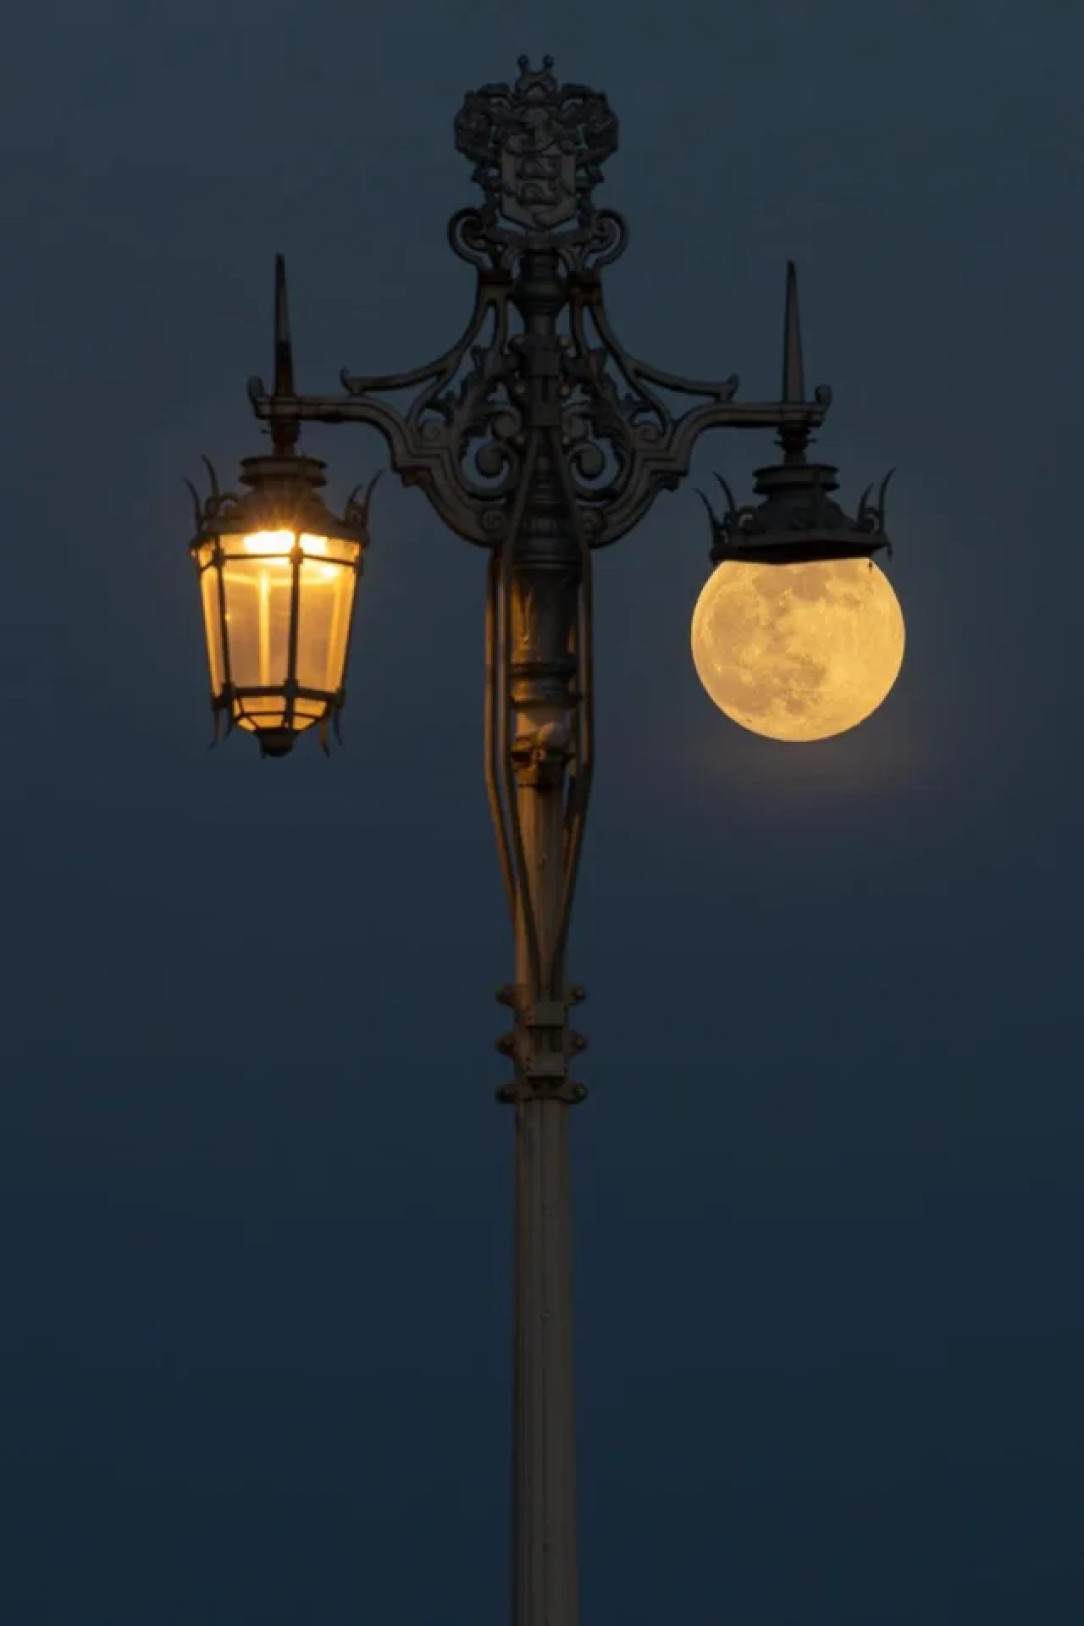 The moon moved in just the right position to look like a street lamp